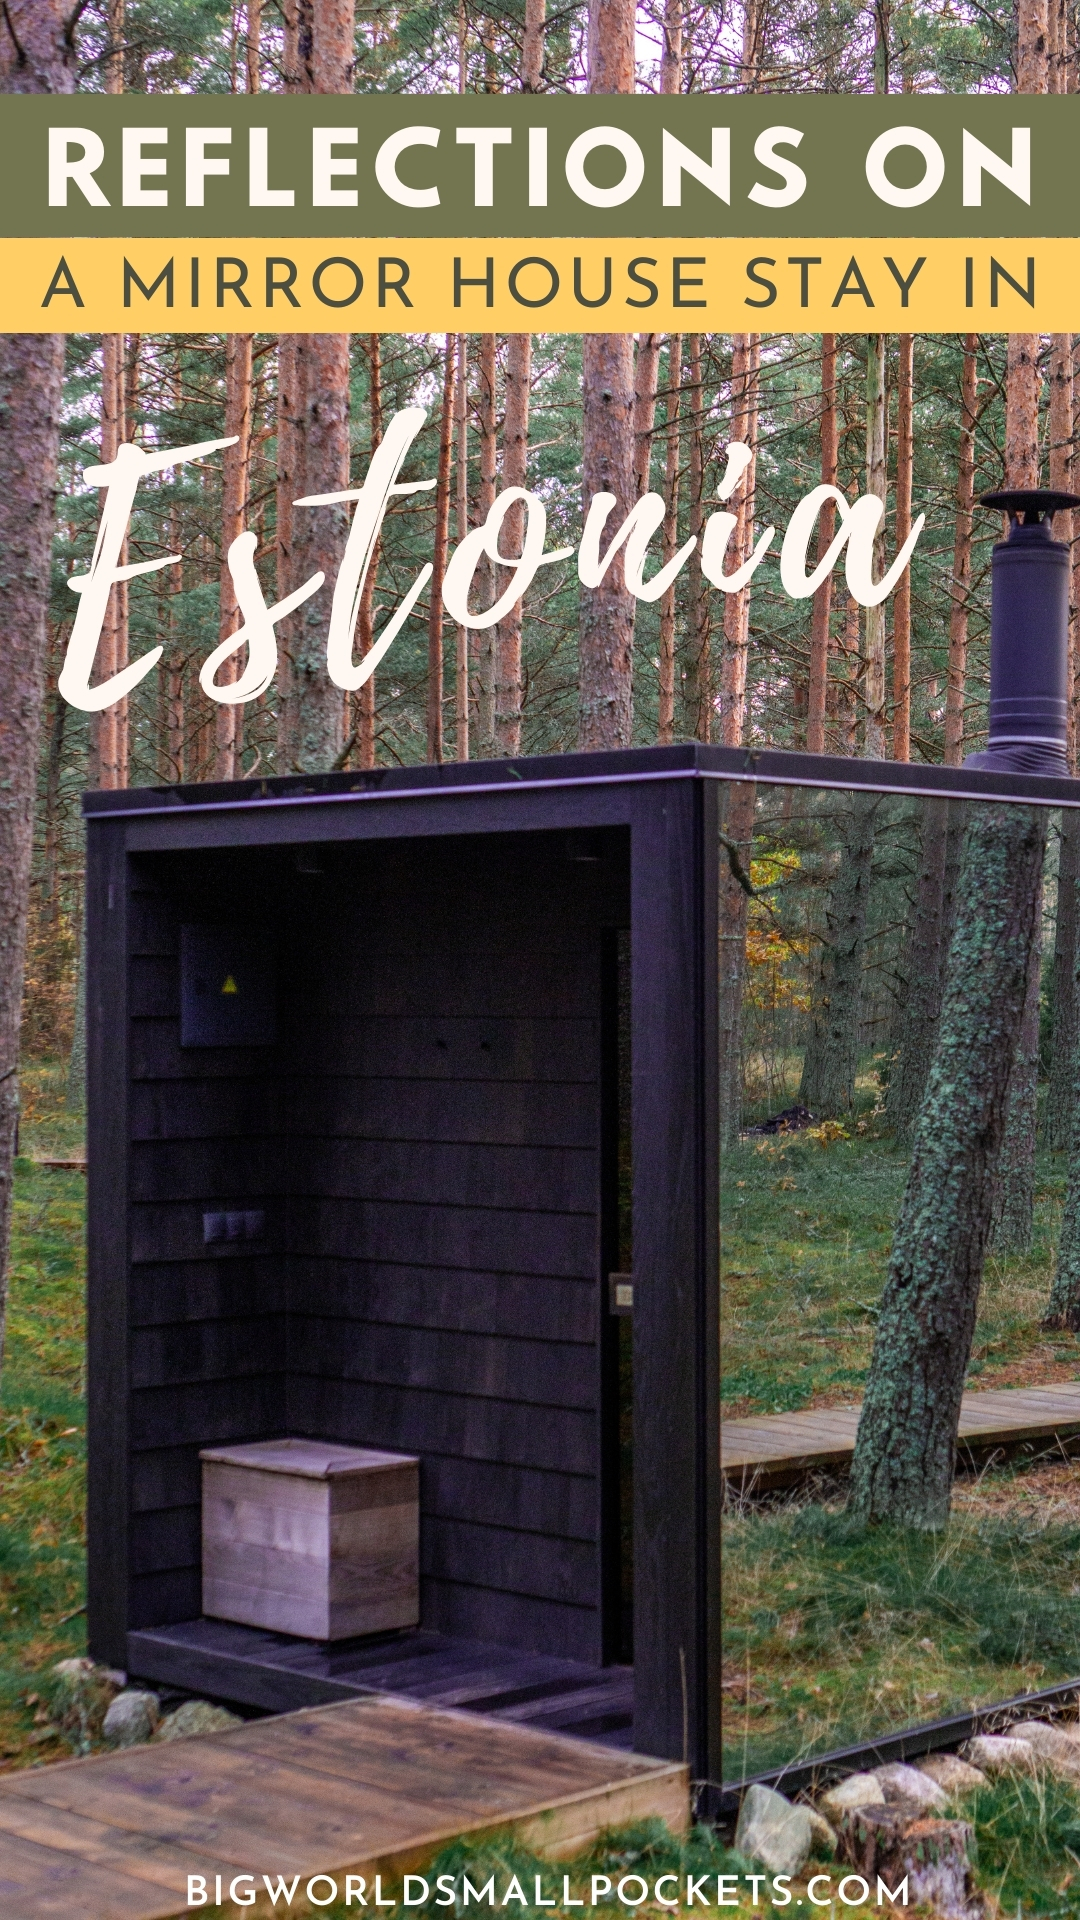 Reflections on a Mirror House Stay in Estonia